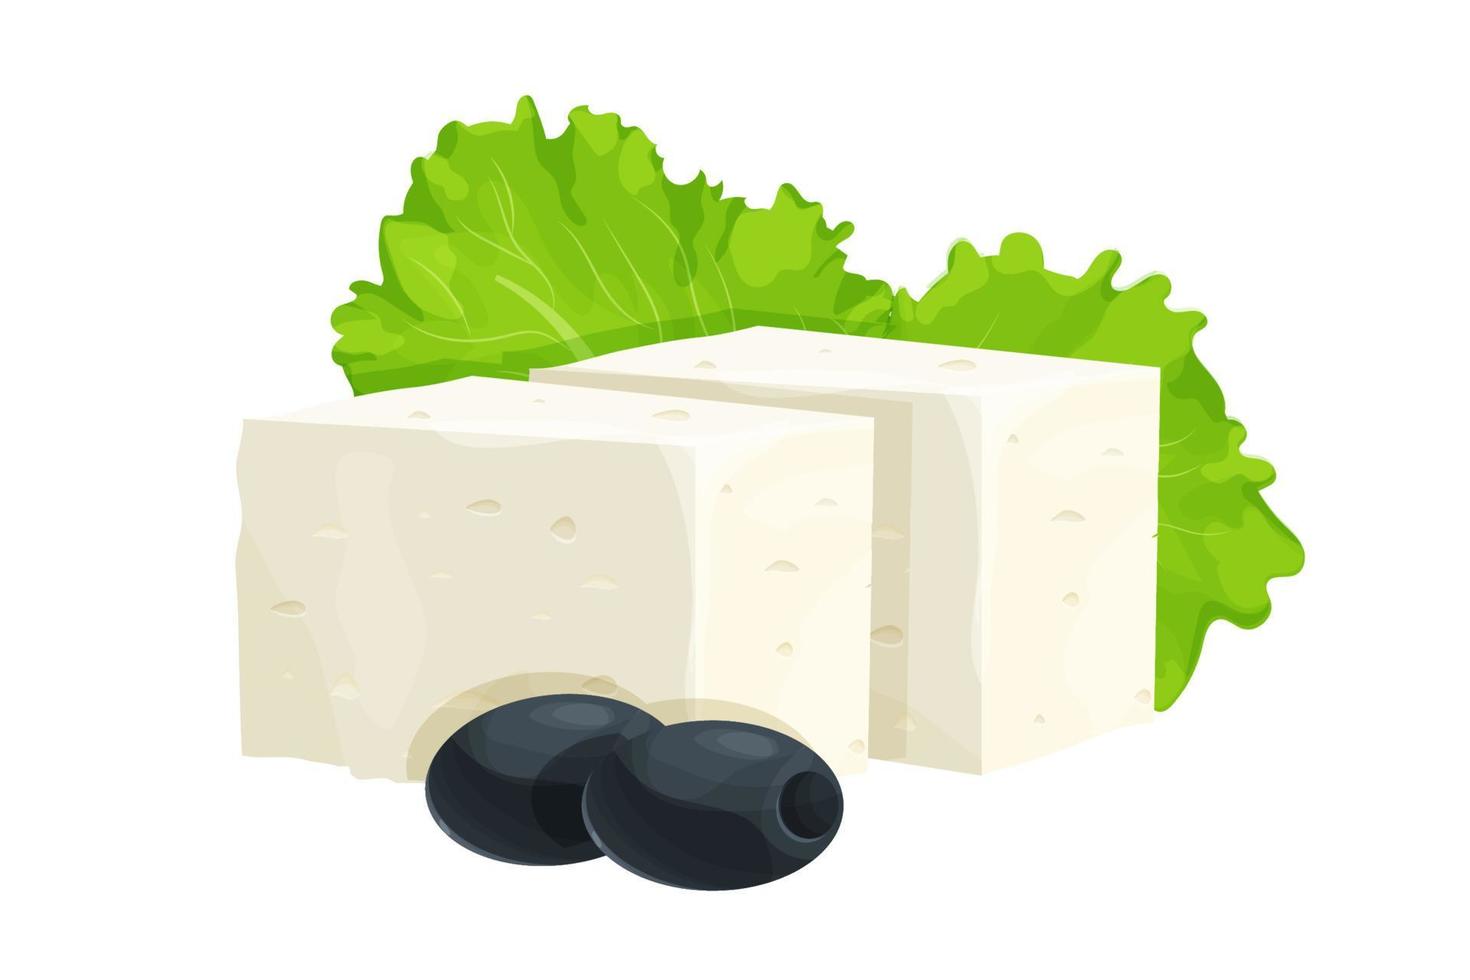 Feta cheese pieces decorated with black olives and lettuce leaves in cartoon style isolated on white background. Dairy product, ingredient. Vector illustration